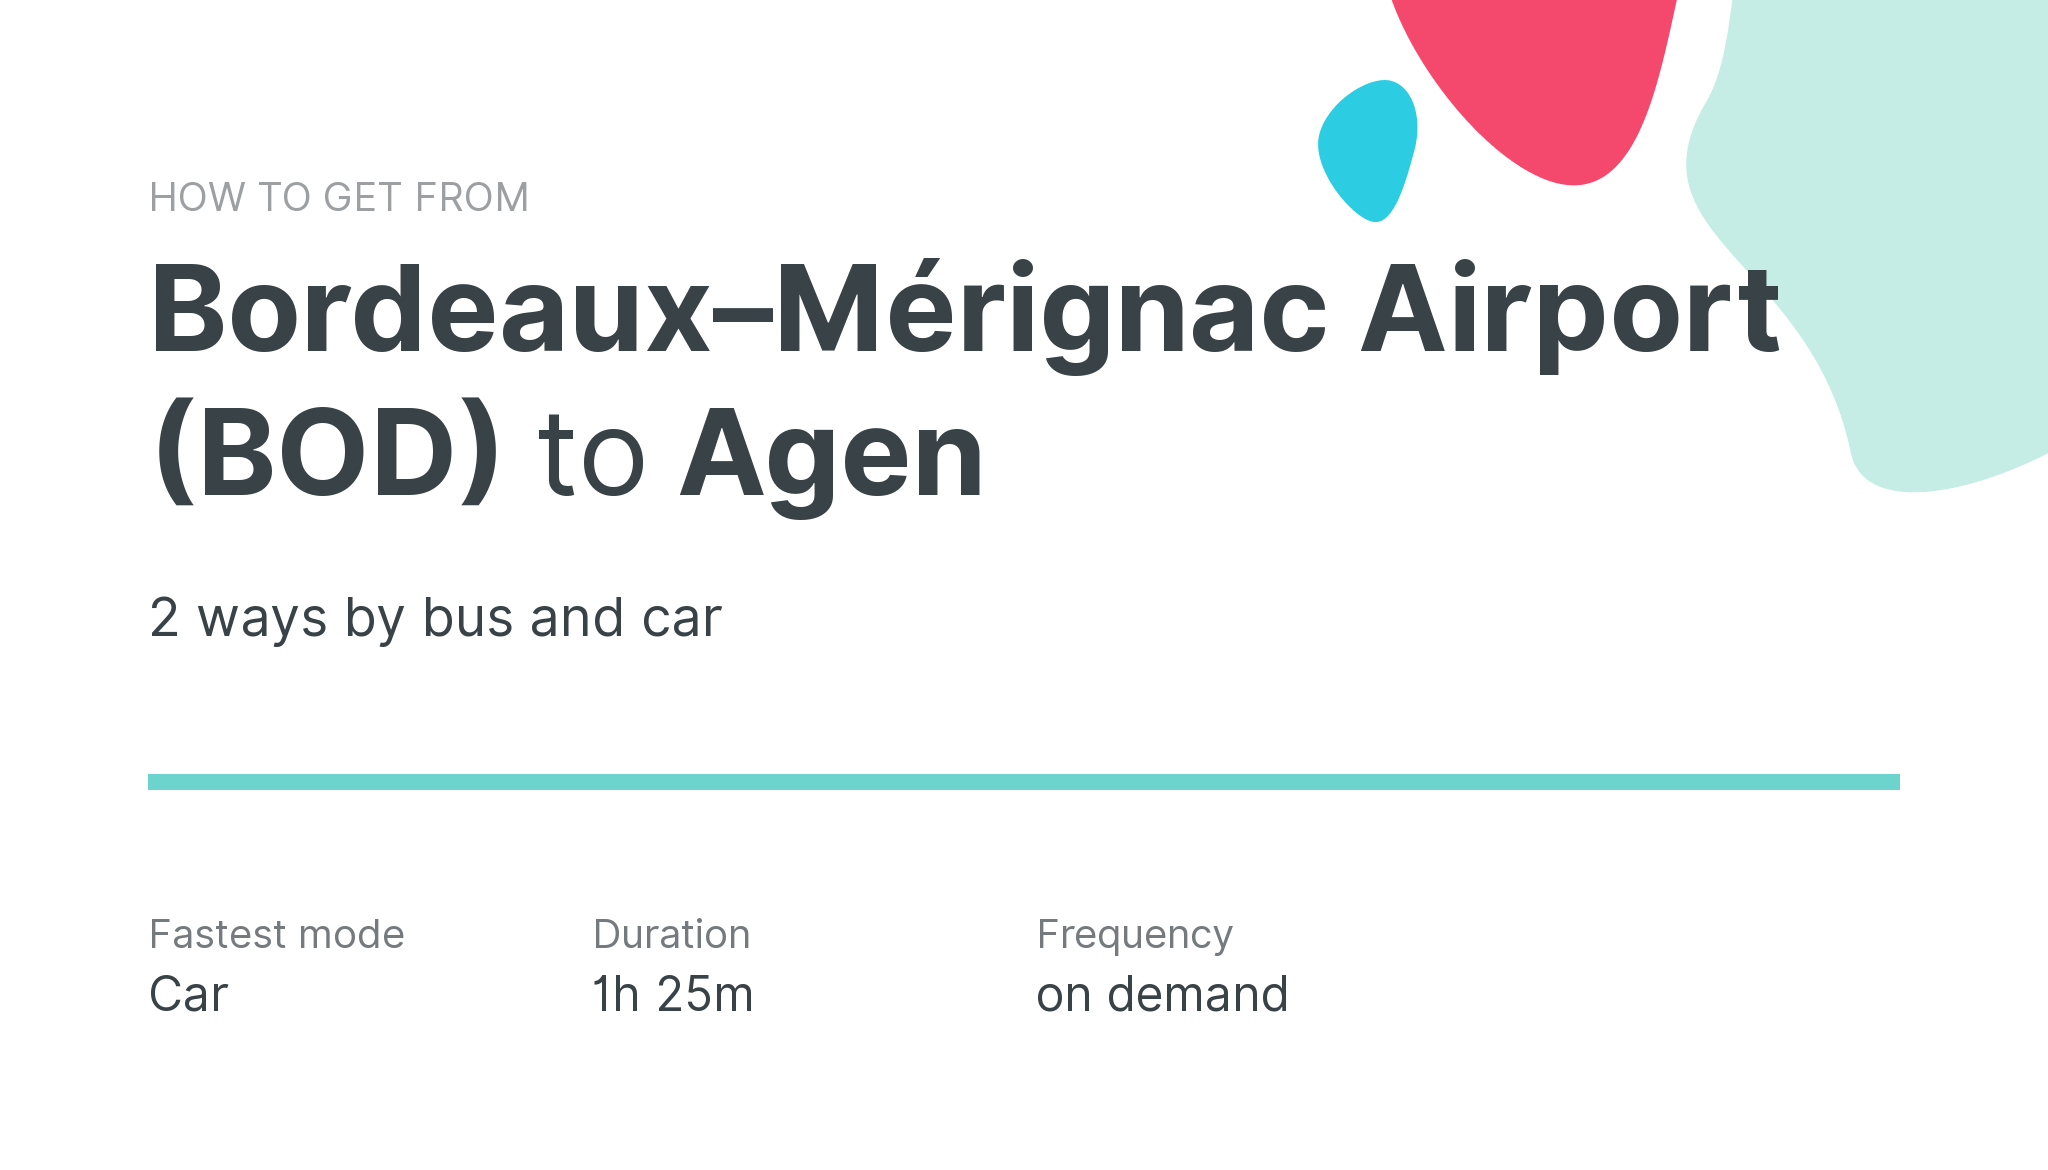 How do I get from Bordeaux–Mérignac Airport (BOD) to Agen